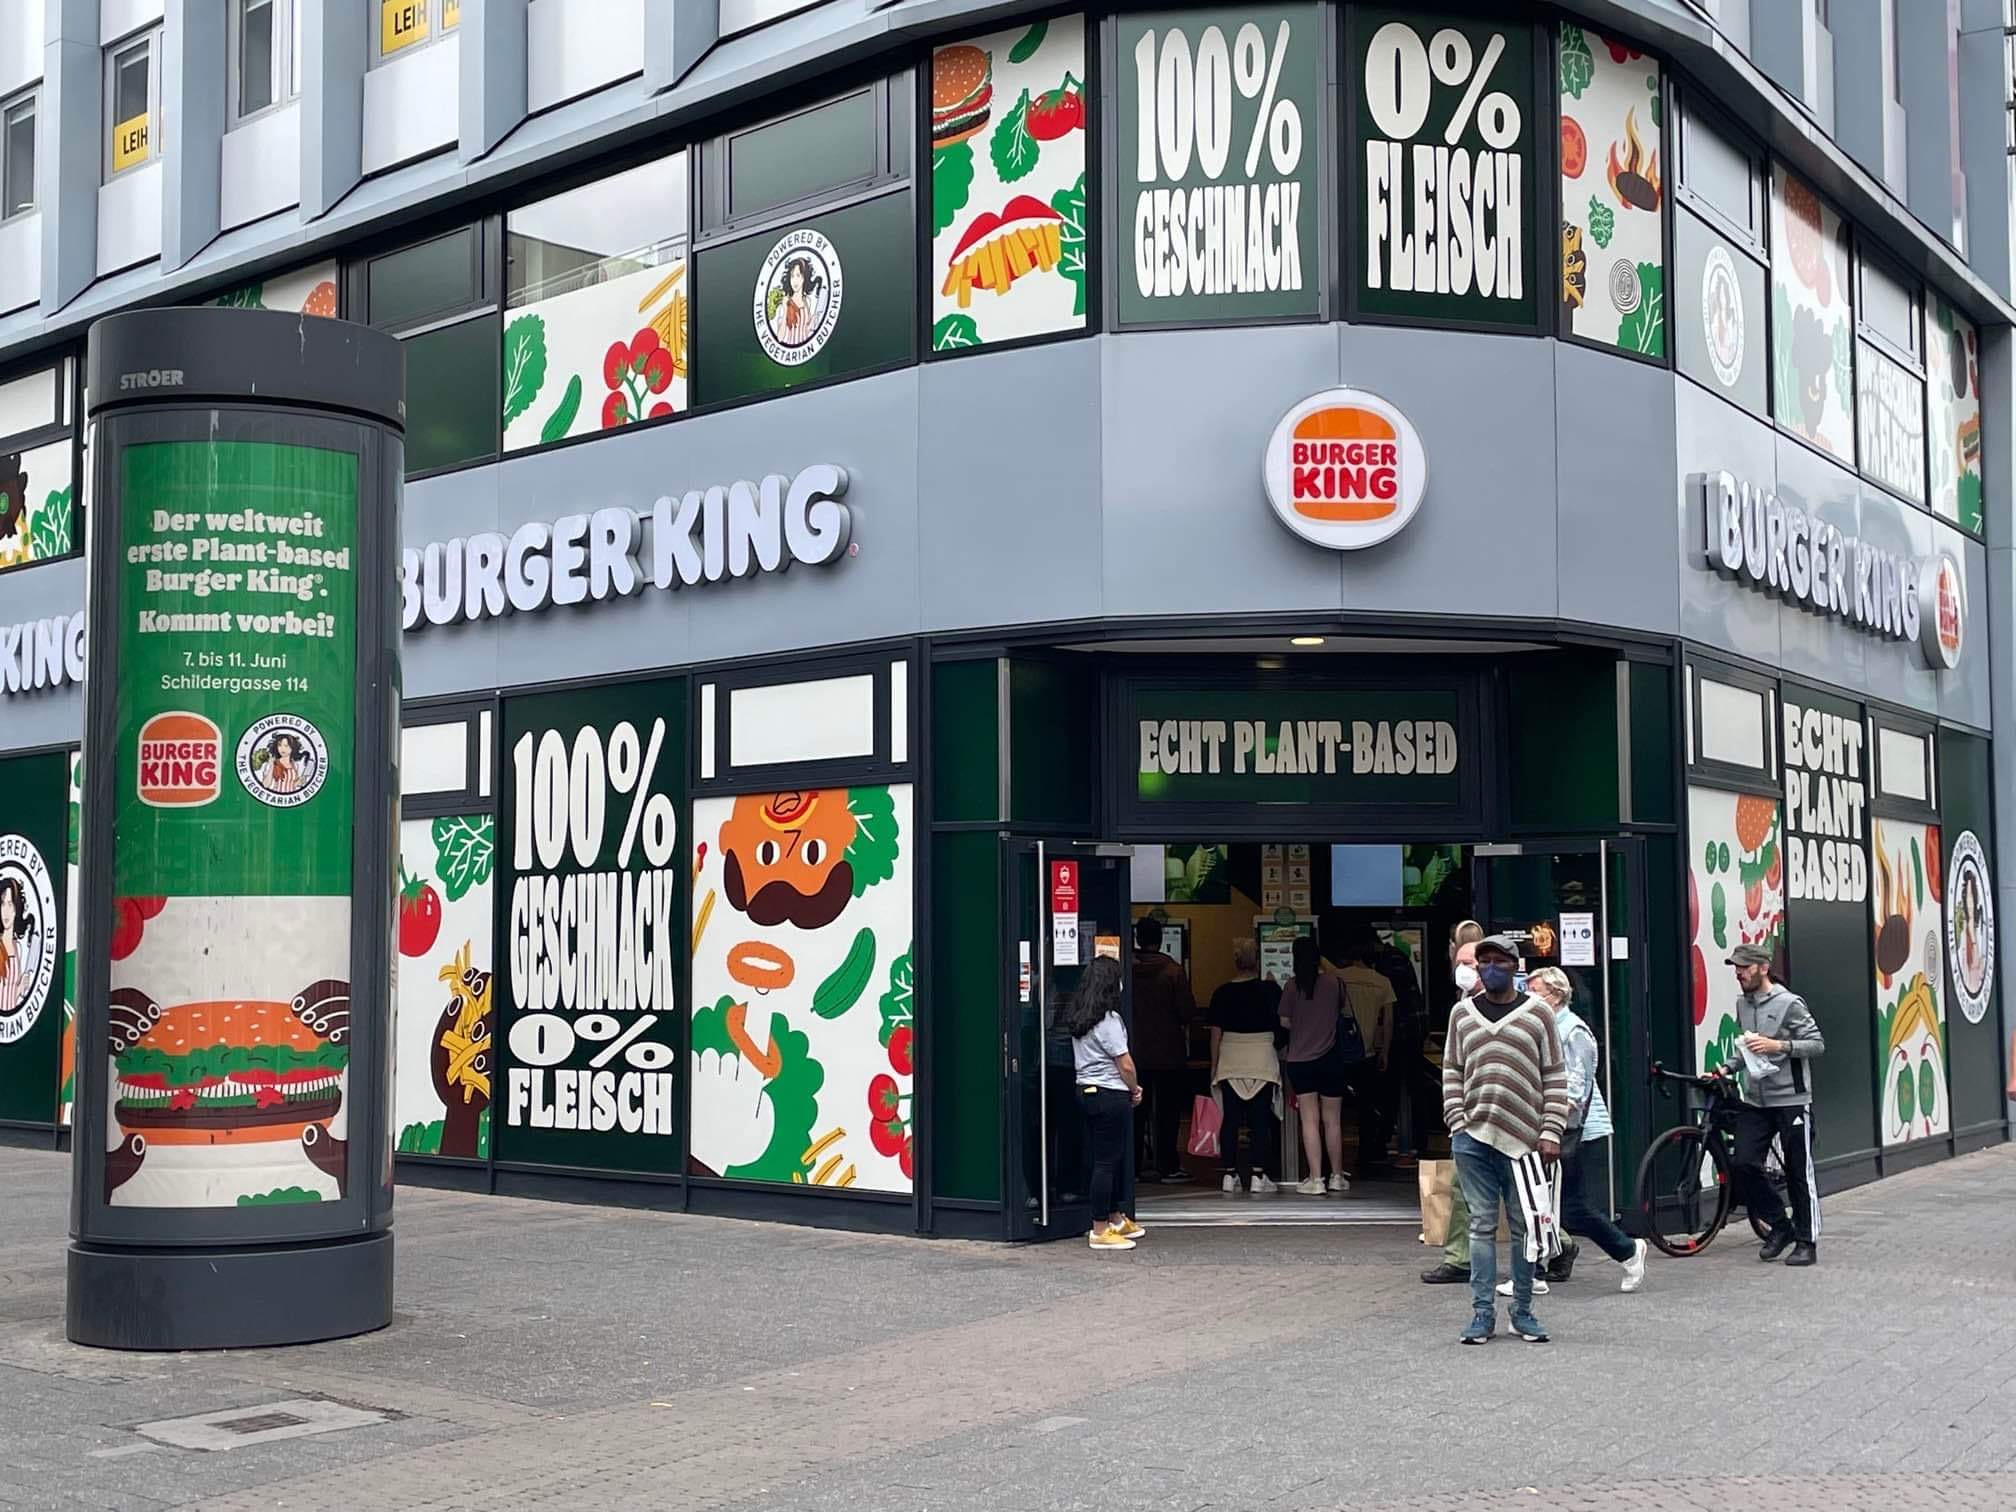 “Whether vegetarians, flexitarians or meat lovers - with our exclusive plant-based products everyone gets their money's worth,” — says promotion for the event on the company website. The event is taking place in Schildergasse, Cologne, from June 7–11.